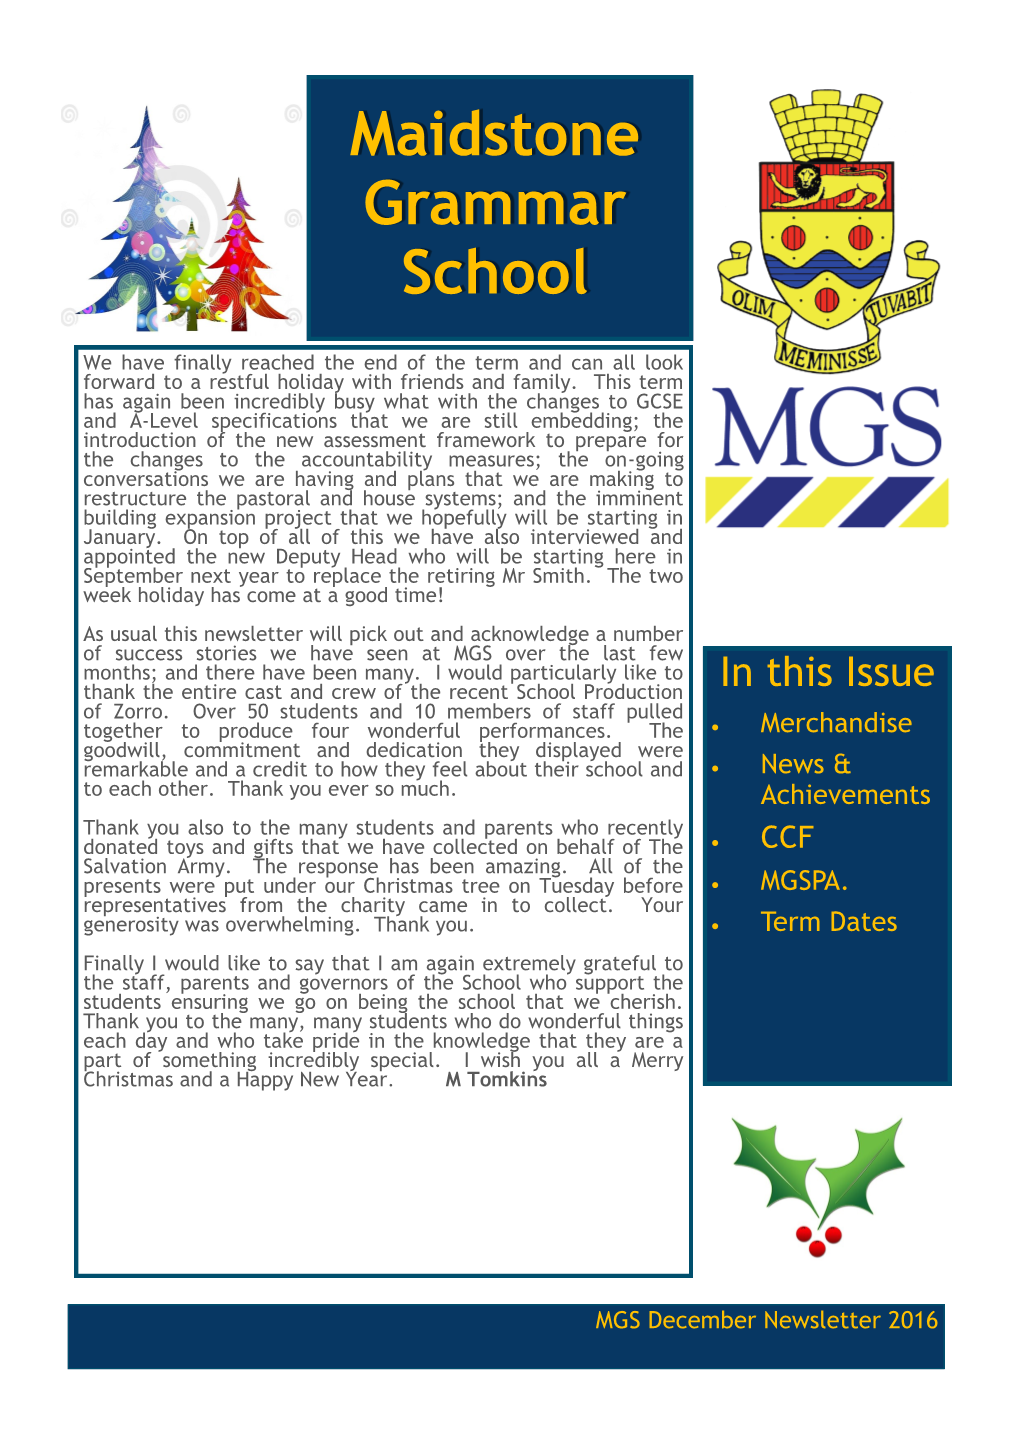 Maidstone Grammar School Community and Extend Their Grateful Appreciation to All of You